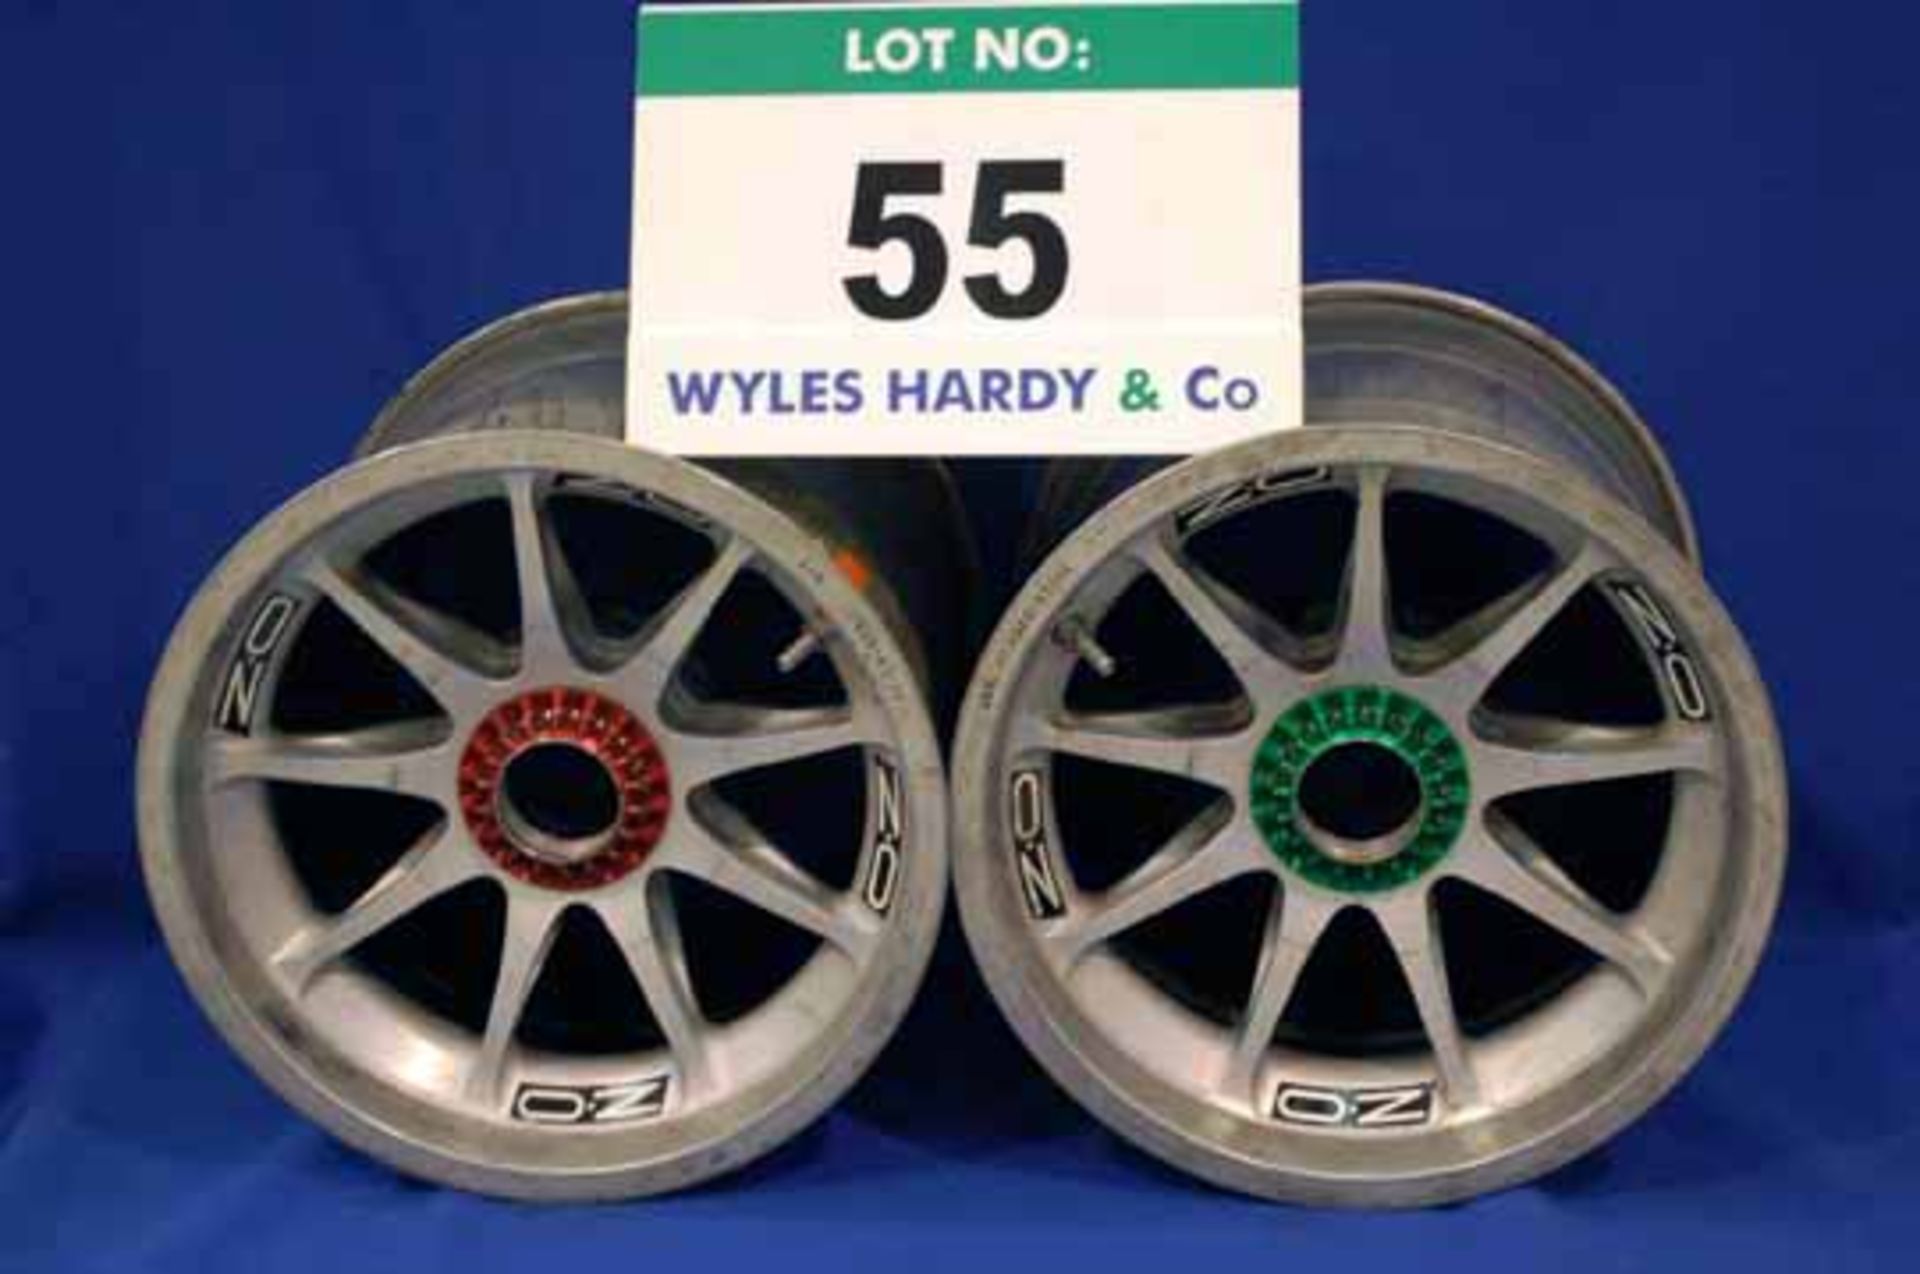 Two OZ 2014 F1 Front Wheel Rims, fitted Captive Wheel Nuts & Tyre Pressure Monitoring